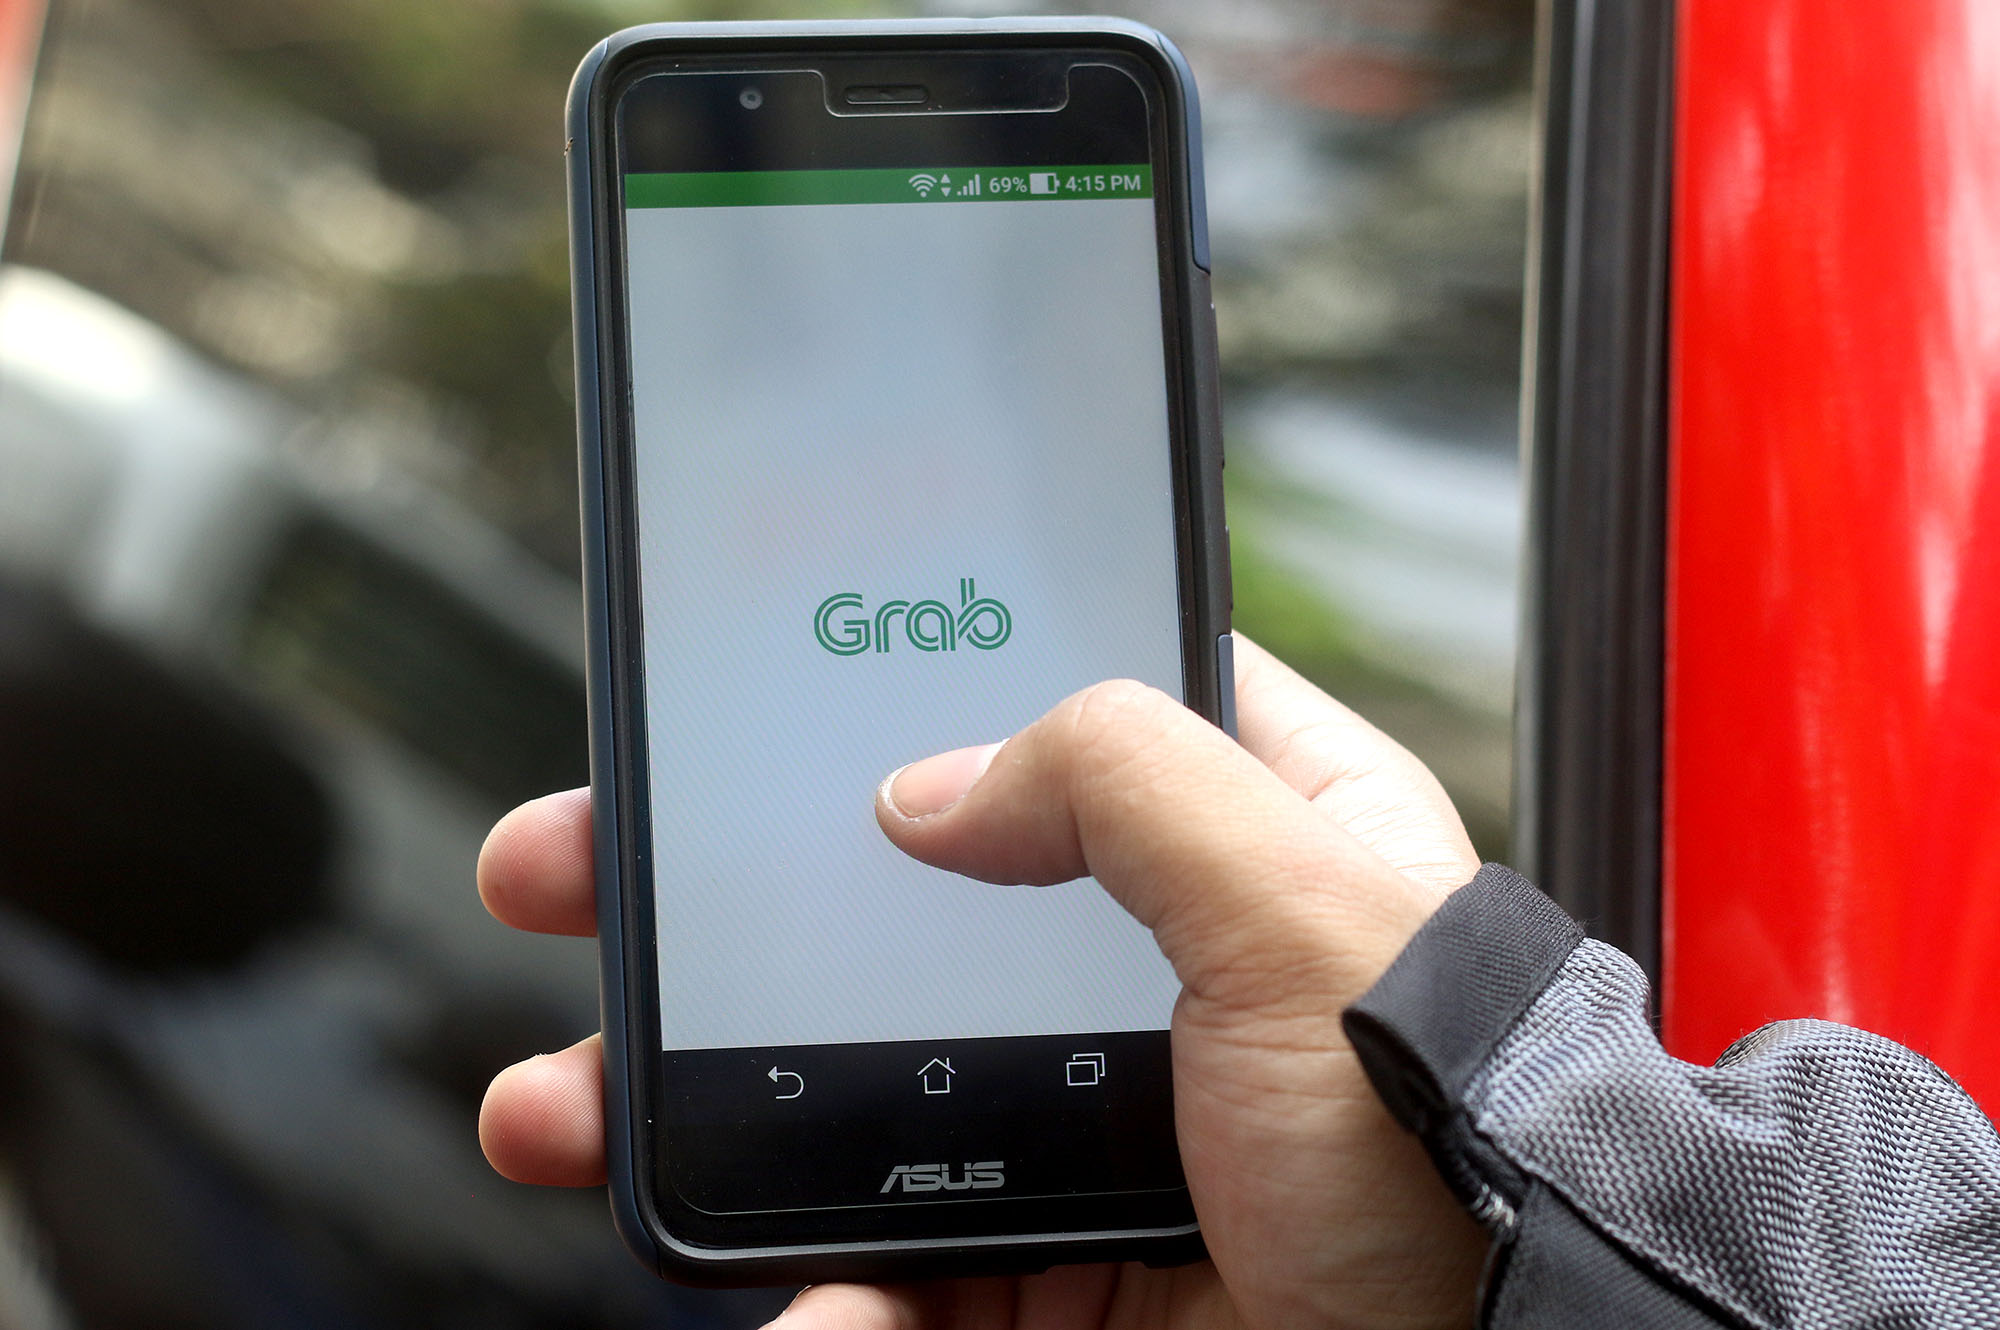 Grab gave 'incorrect' data about its pricing to government - PCC